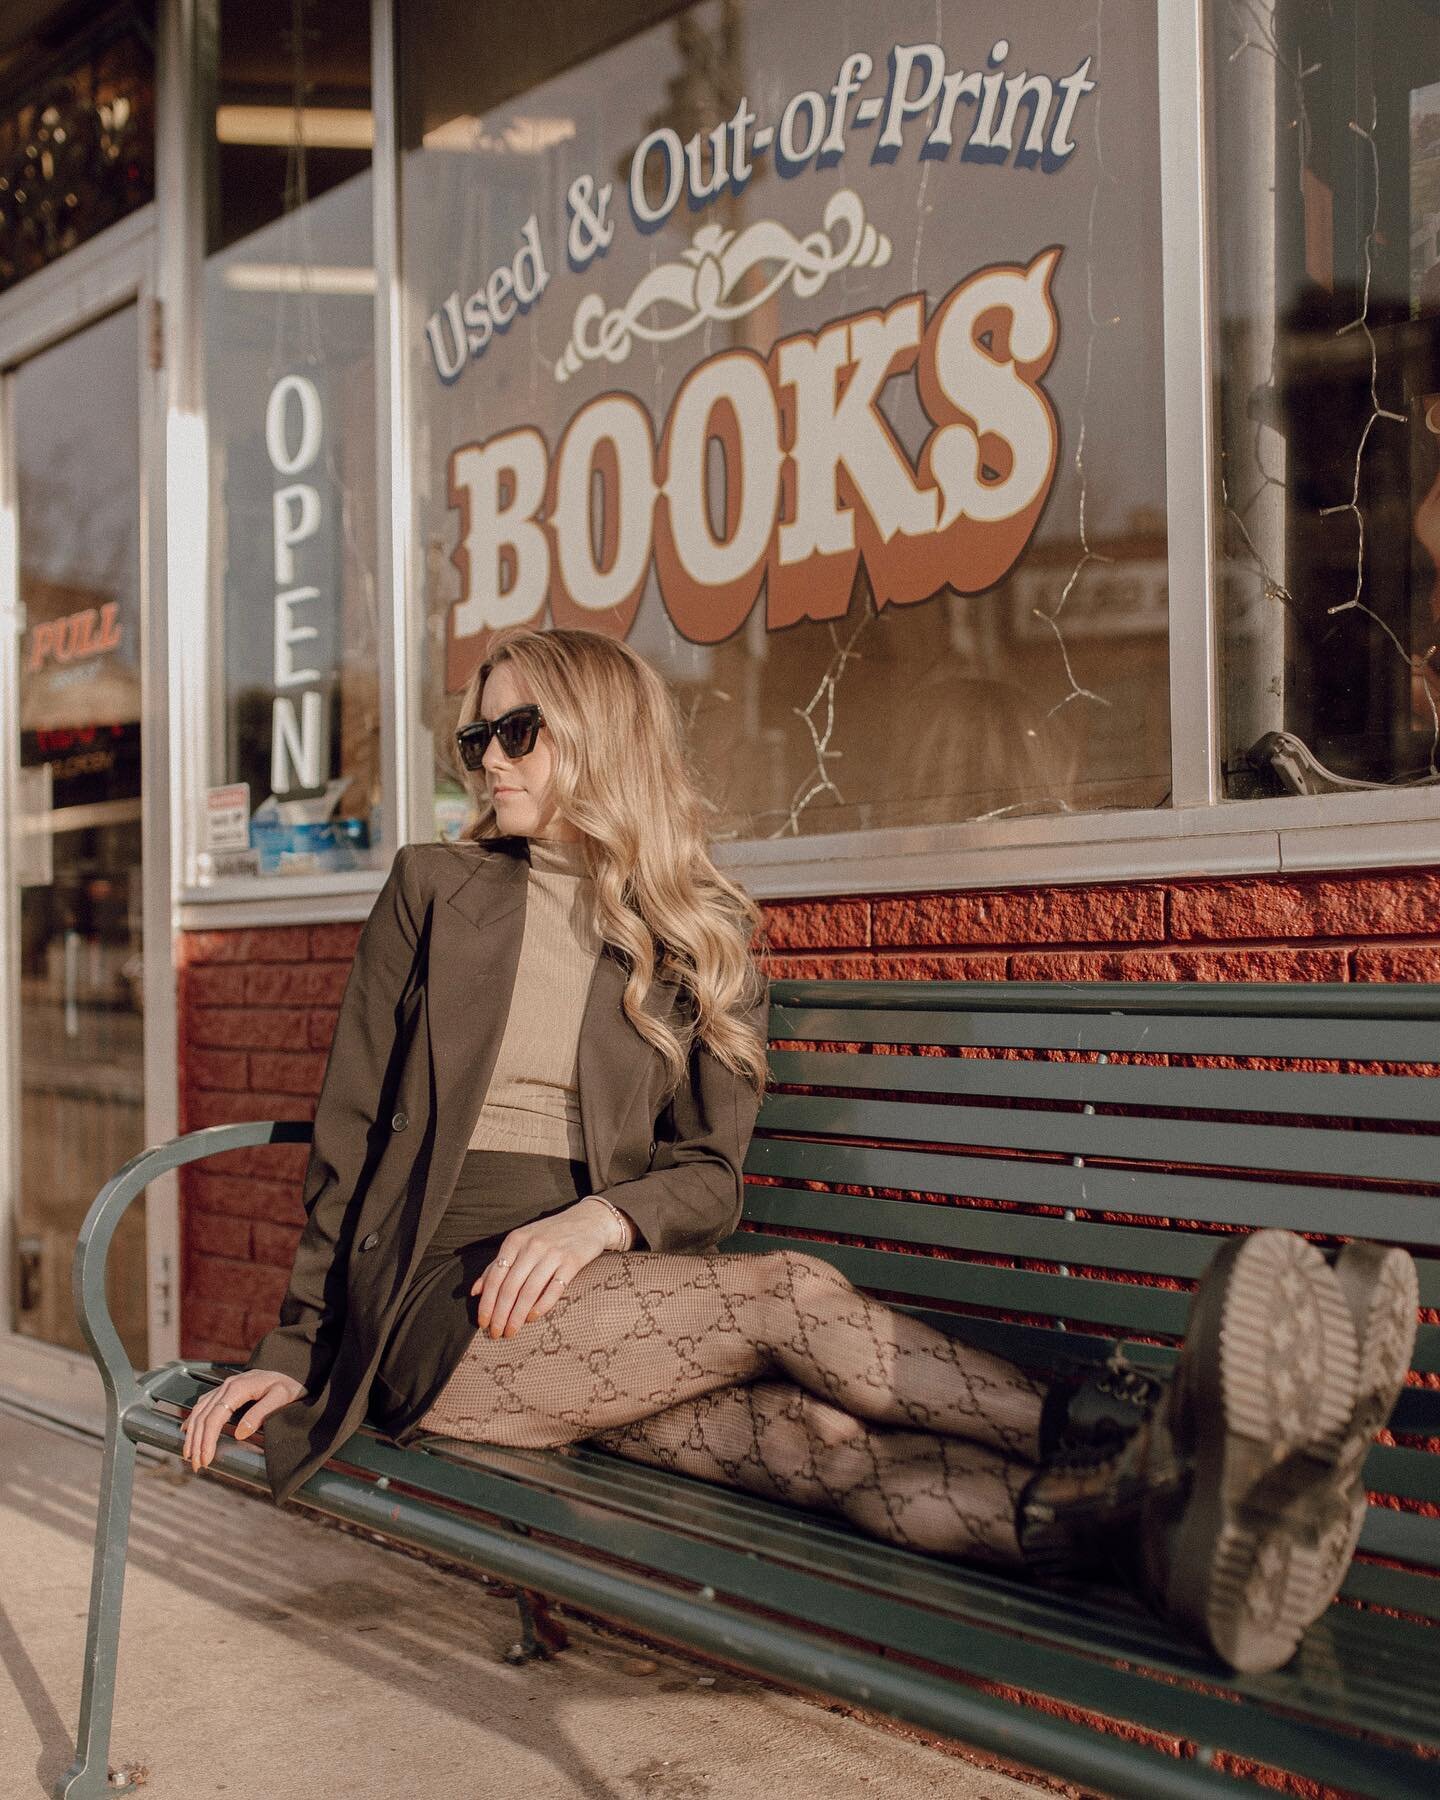 afternoon at the bookstore 🤎📖

#model #modeling #newyorkphotography #nyc  #nycphotographer #elopement #elopementphotographer 
#photography #wedding #weddinginspiration #weddingphotography #nycwedding #nycweddingphotographer #nwaphotography #arkansa